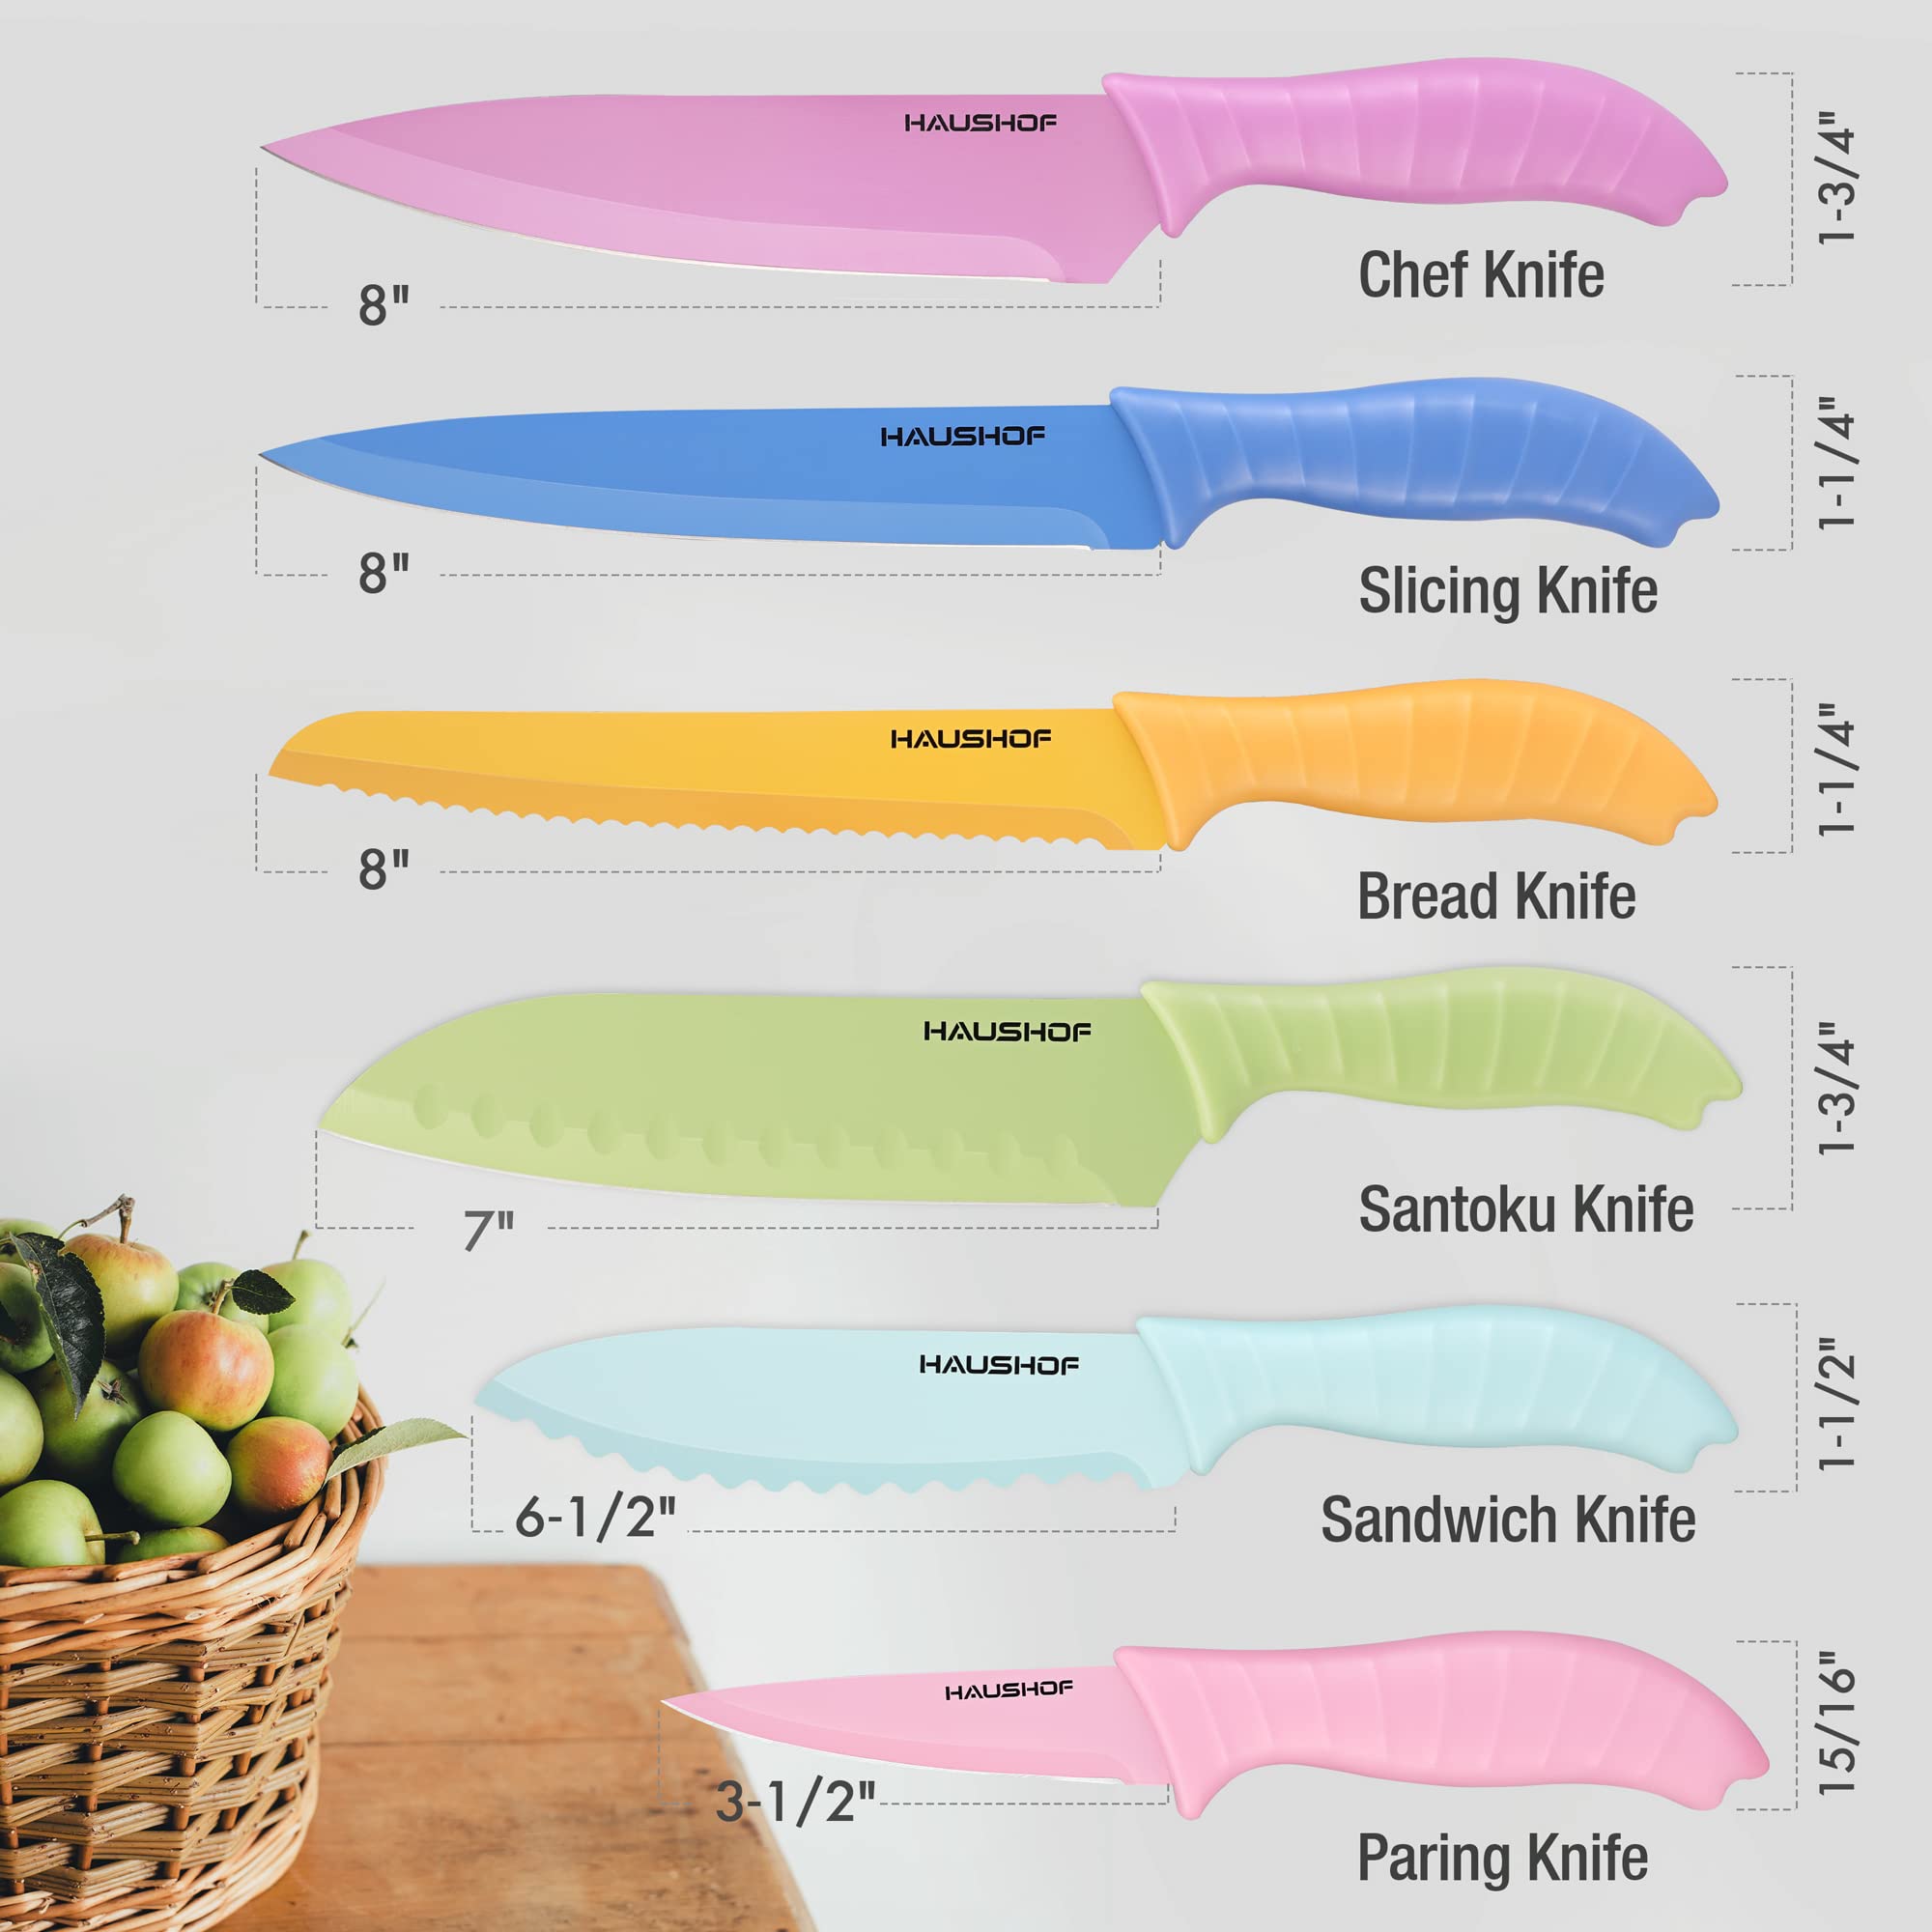 HAUSHOF Kitchen Knife Set, 6-Piece Colorful Knives Set with Sheaths for Kitchen, Non-Stick Coated Stainless Steel Blades for Slicing&Cutting, Gifts Knife Set for Dad, Mom, Husband and Wife